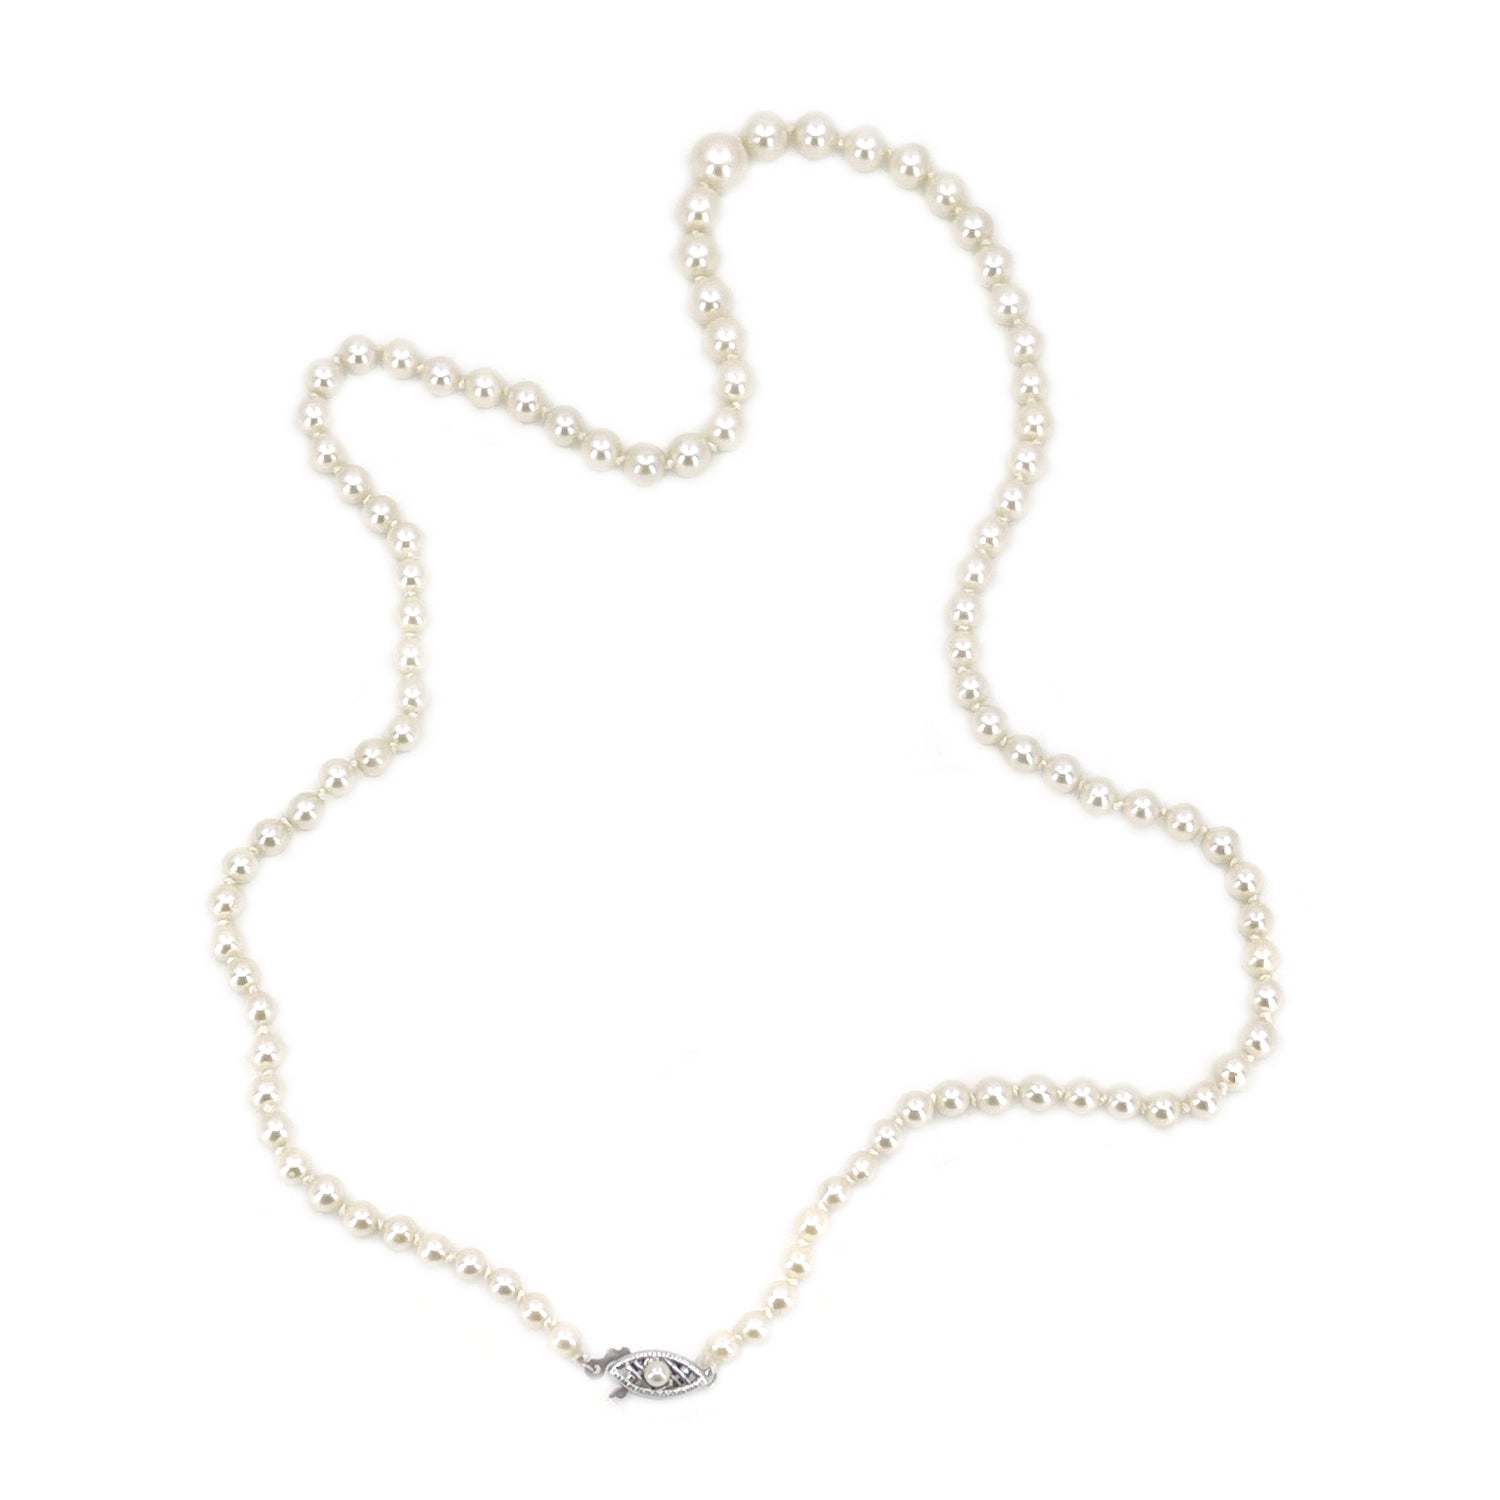 Seed Pearl Japanese Saltwater Cultured Akoya Pearl Strand - 10K White Gold 20 Inch